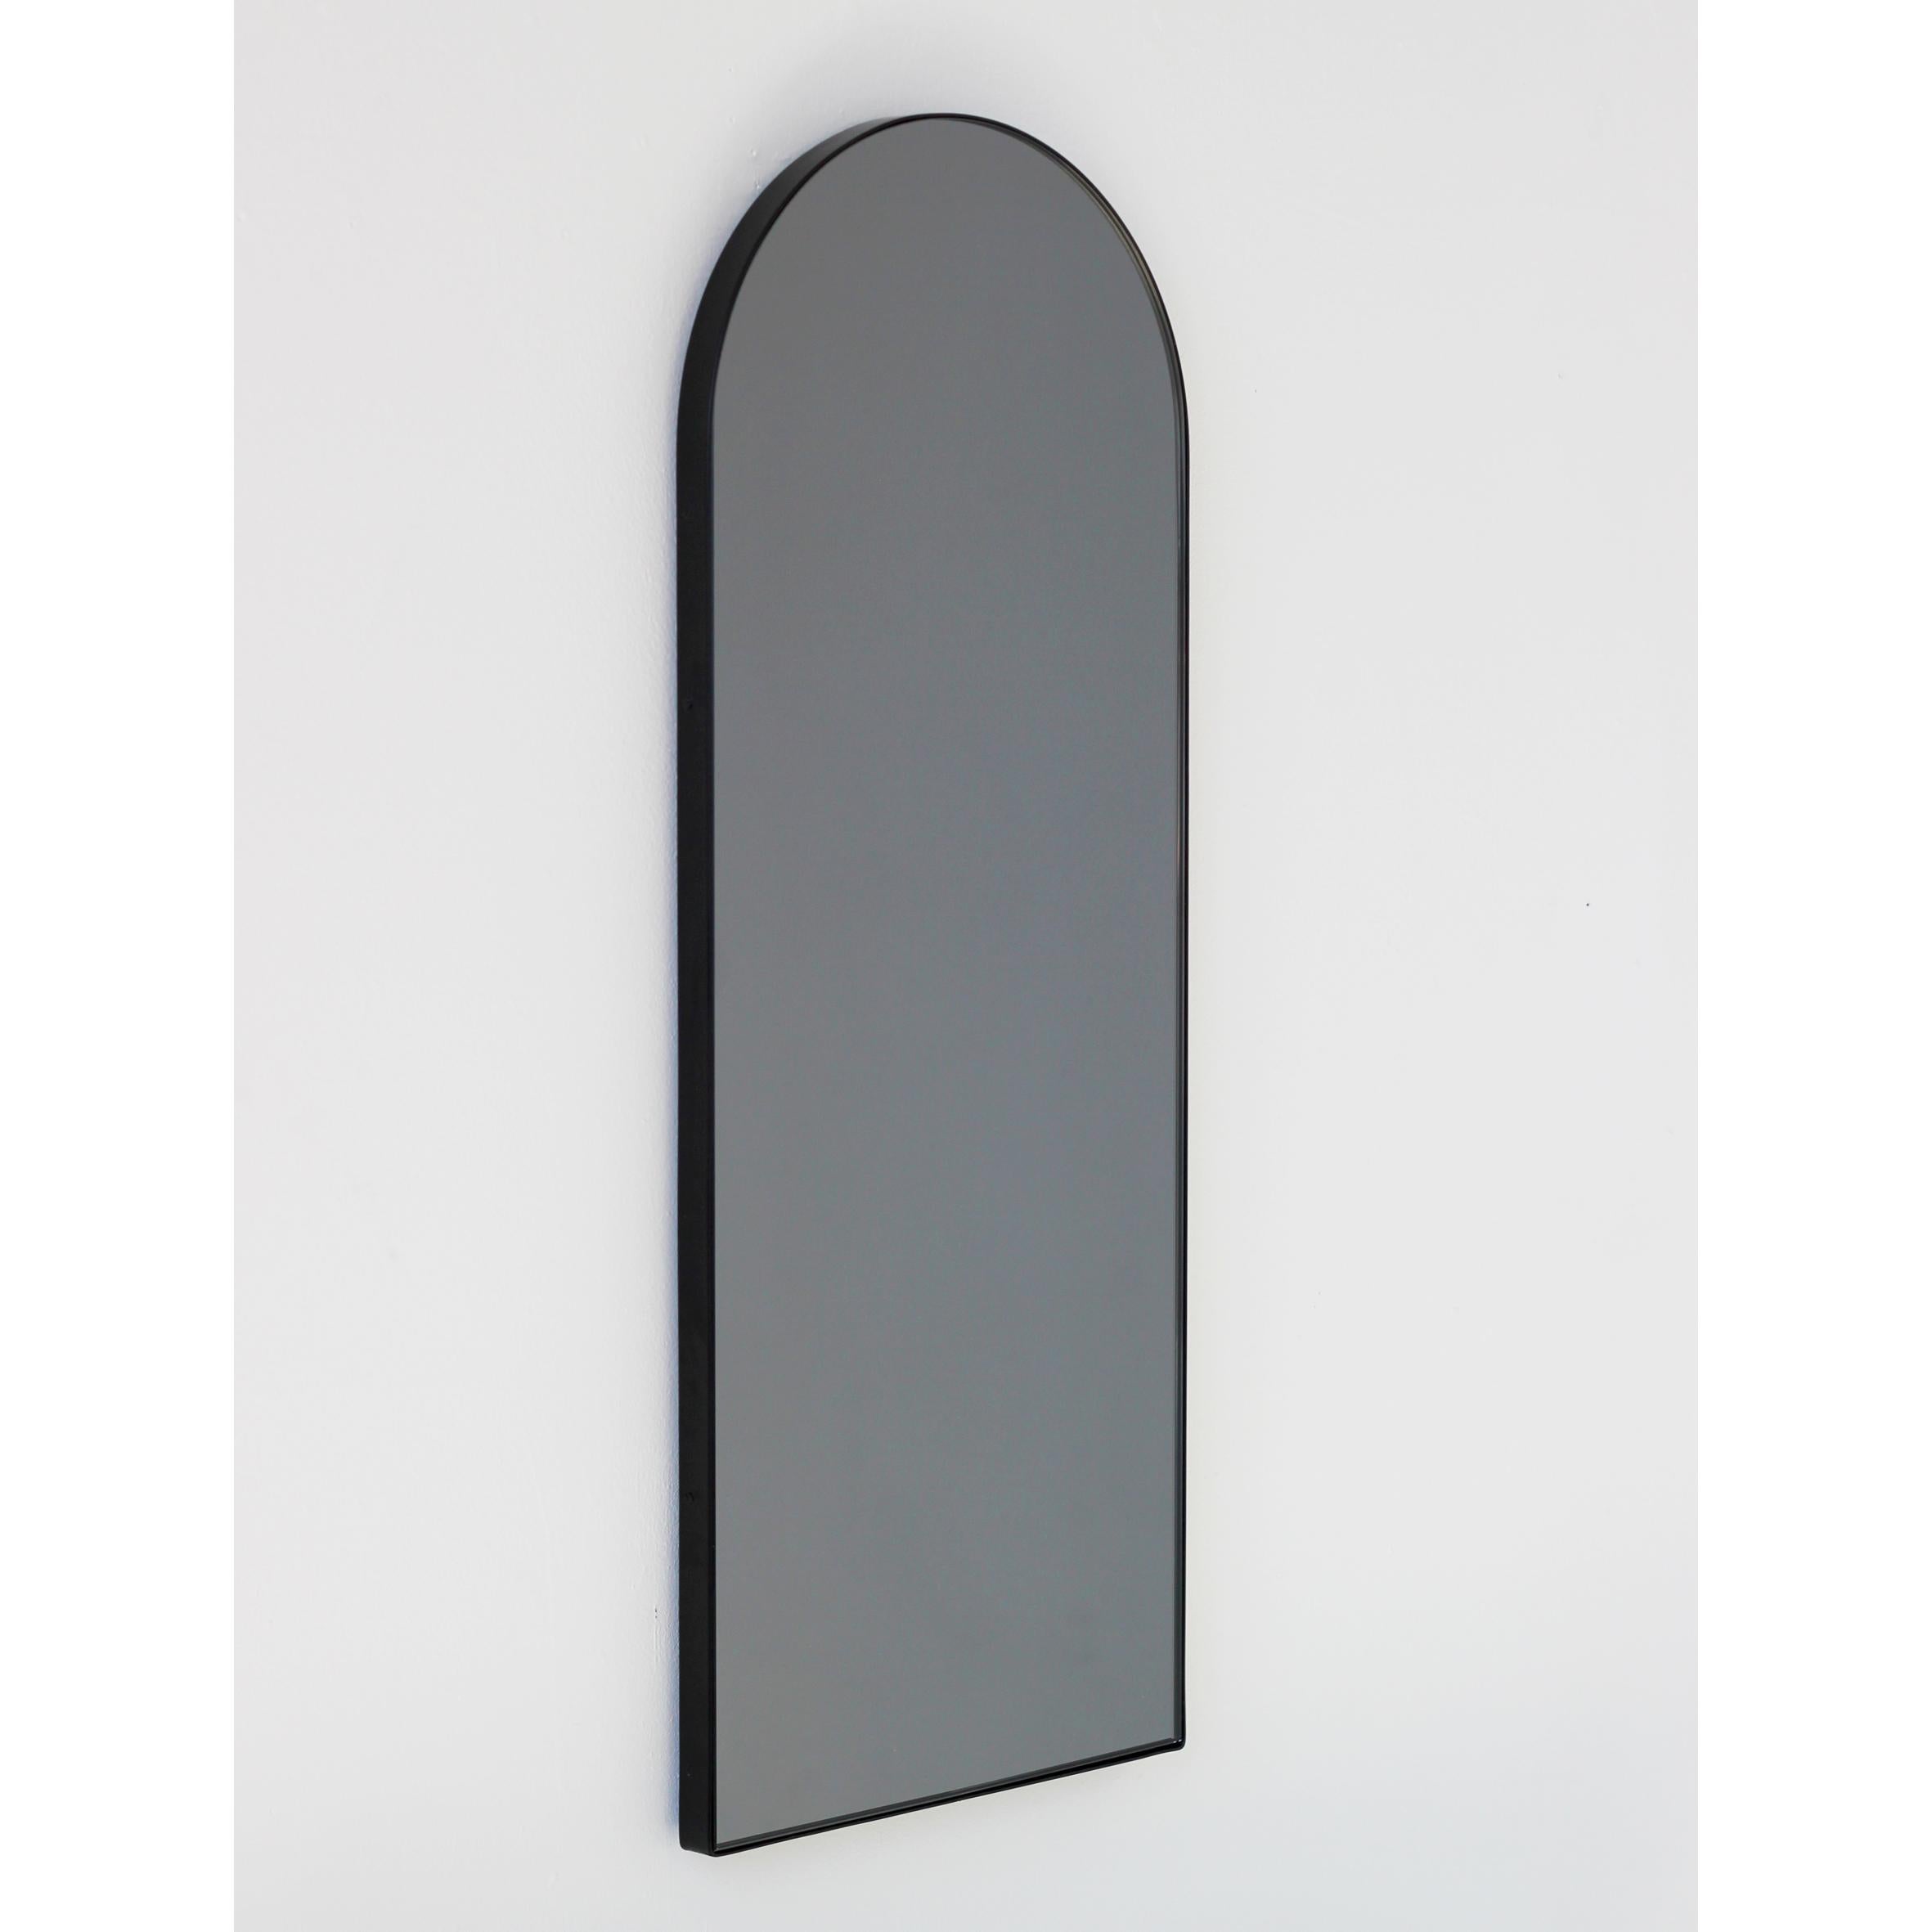 Contemporary arch shaped black tinted mirror with an elegant black frame. Designed and handcrafted in London, UK.

Our mirrors are designed with an integrated French cleat (split batten) system that ensures the mirror is securely mounted flush with